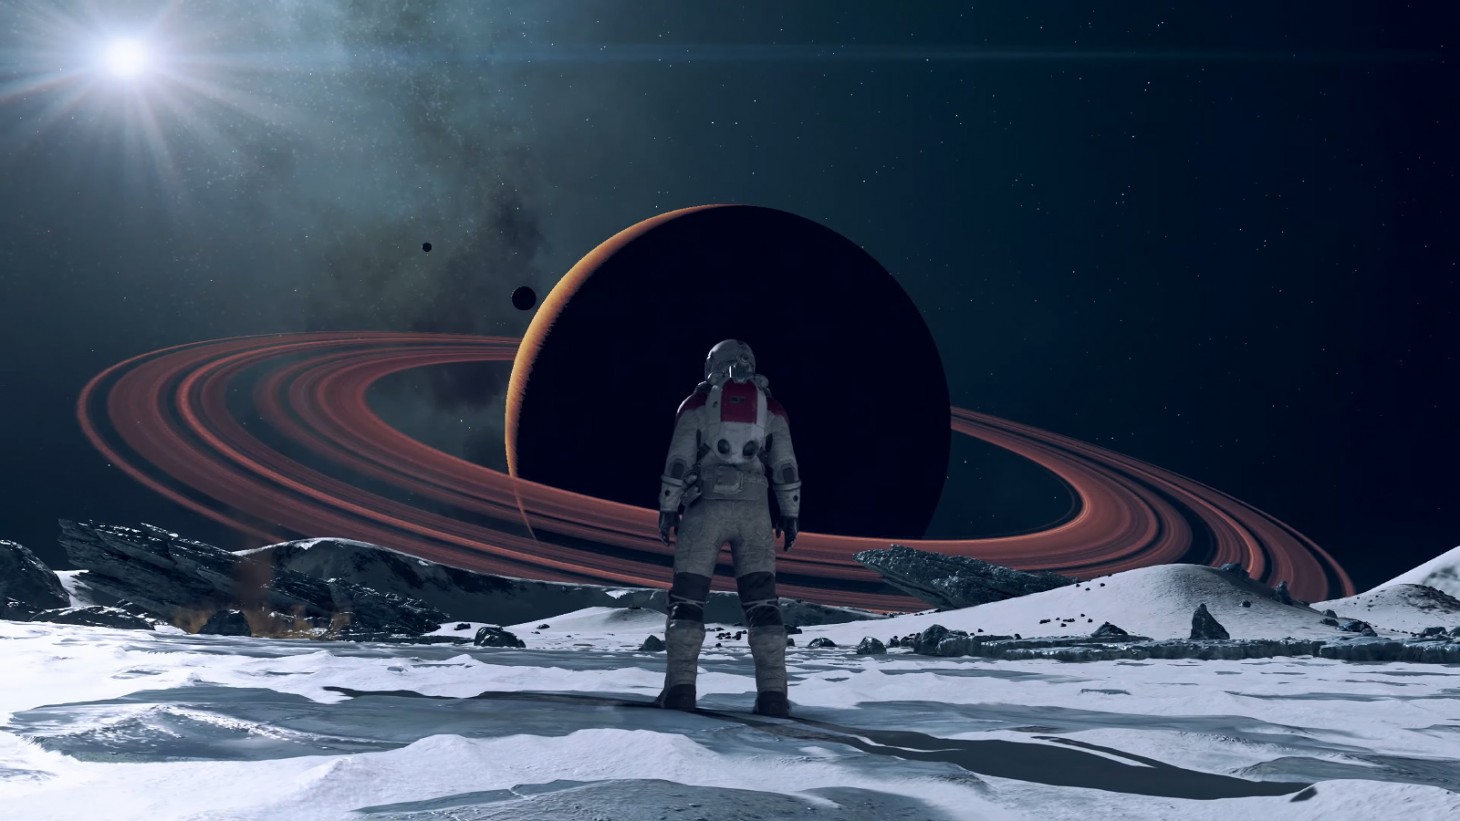 Upcoming space games: Starfield, Star Wars, Mass Effect 4